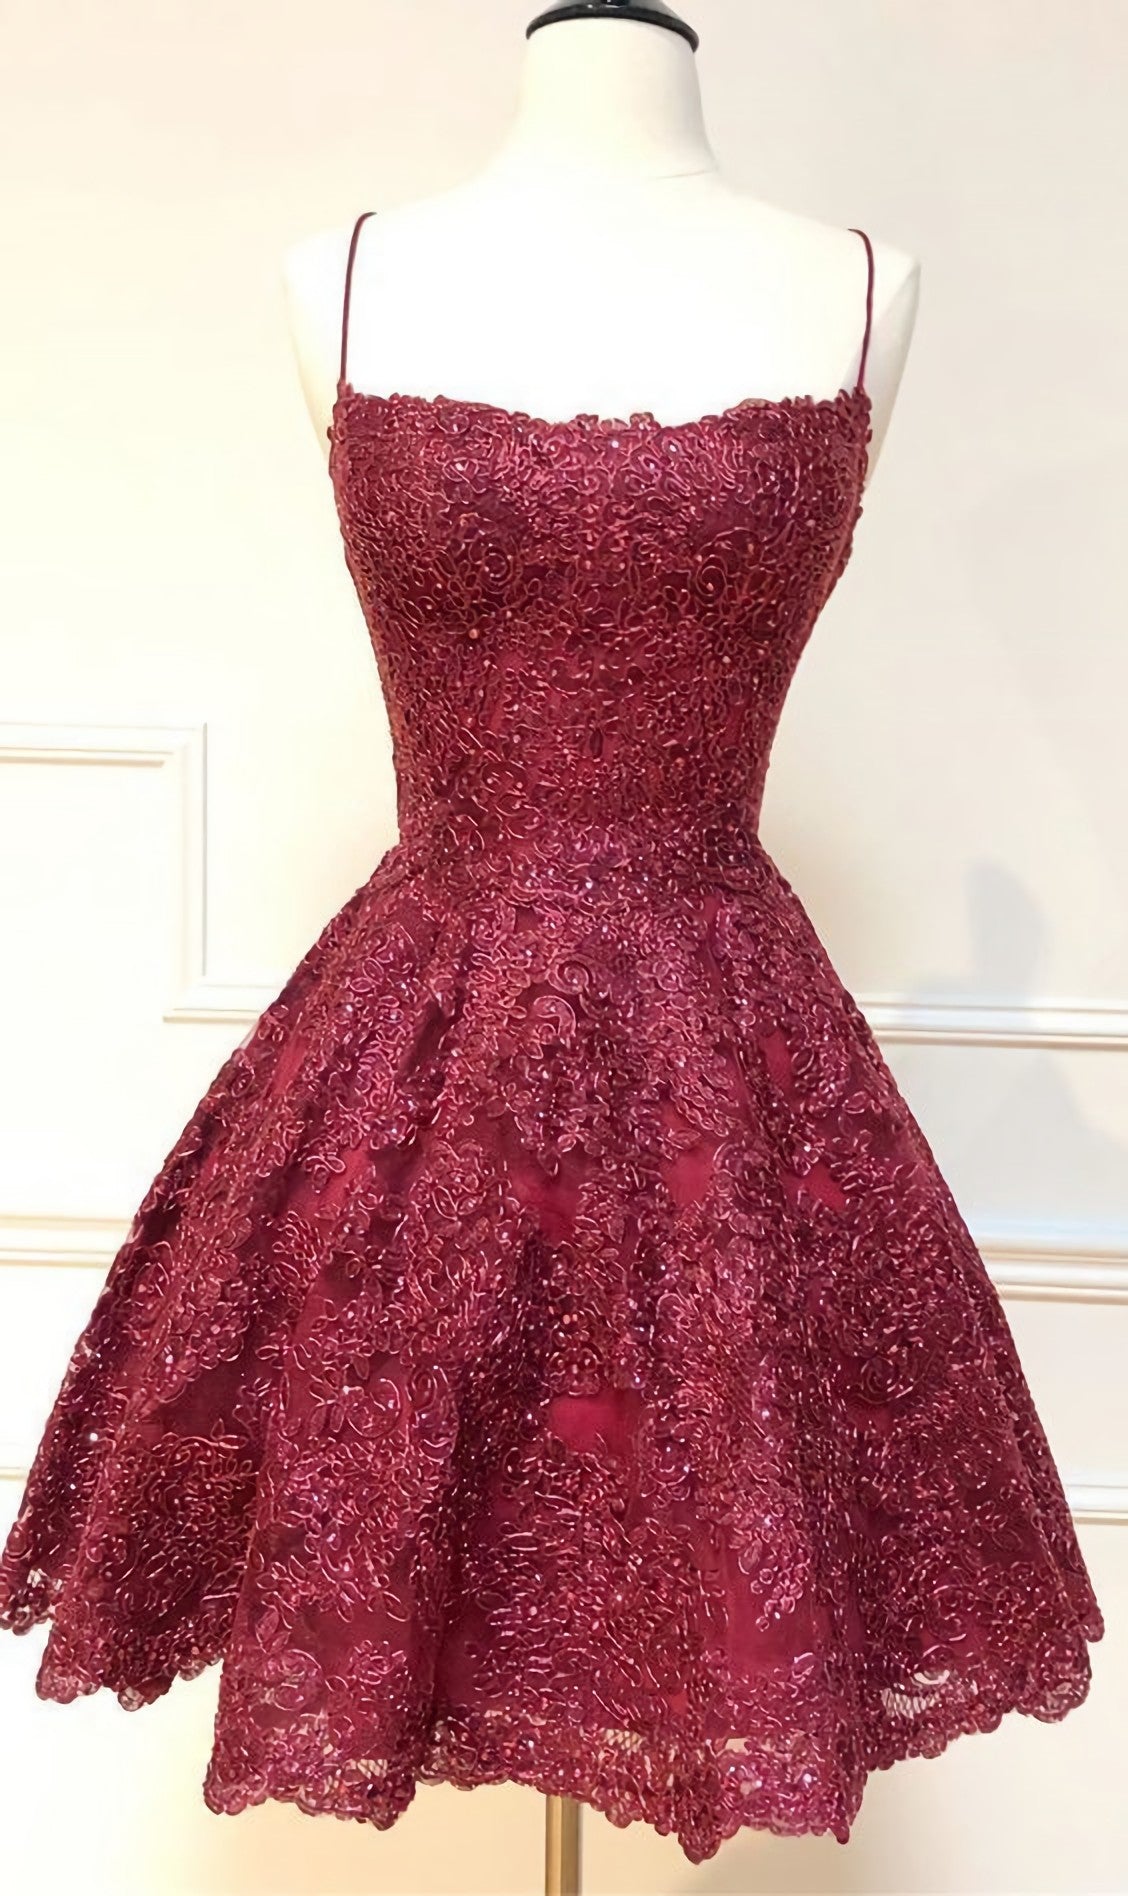 Party Dress For Baby, Formal Short Homecoming Dresses, Spaghetti Straps Cocktail Party Dresses, Burgundy Lace Homecoming Dresses, 2476